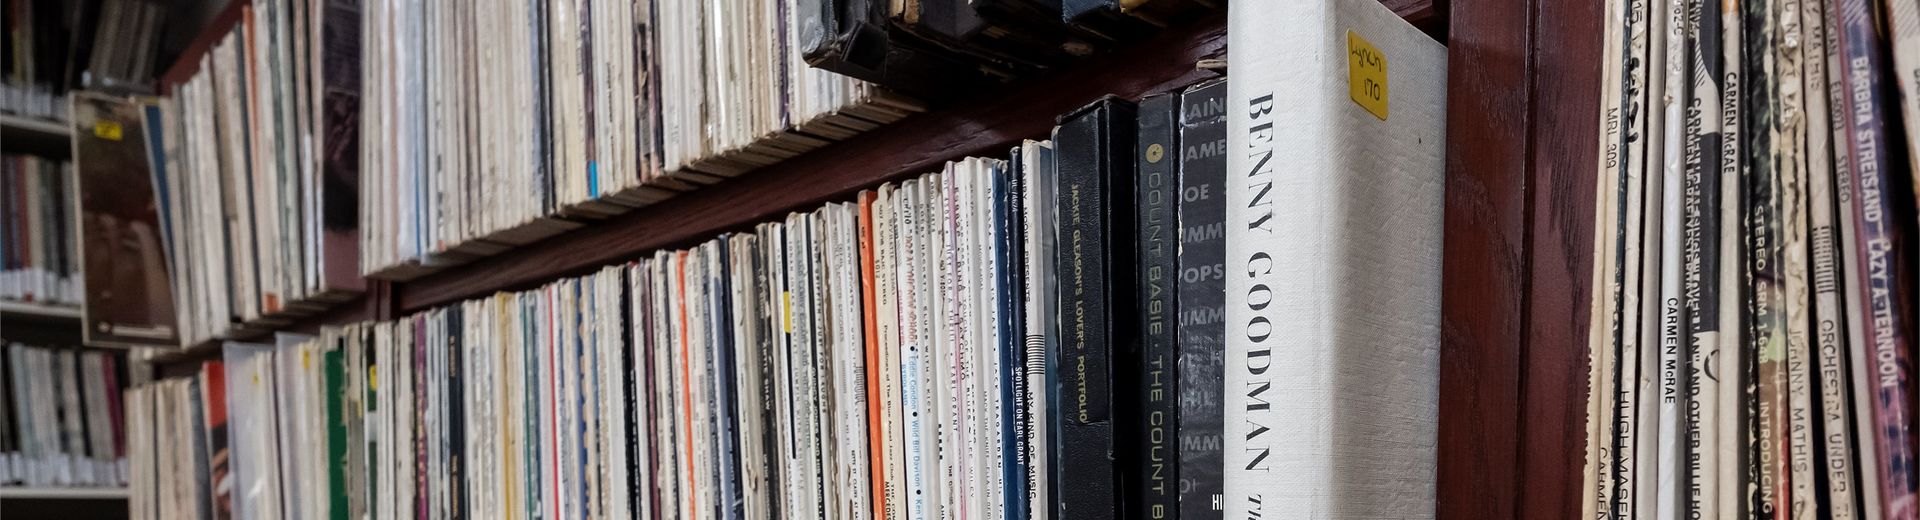 Bookshelf with multiple rows of music records